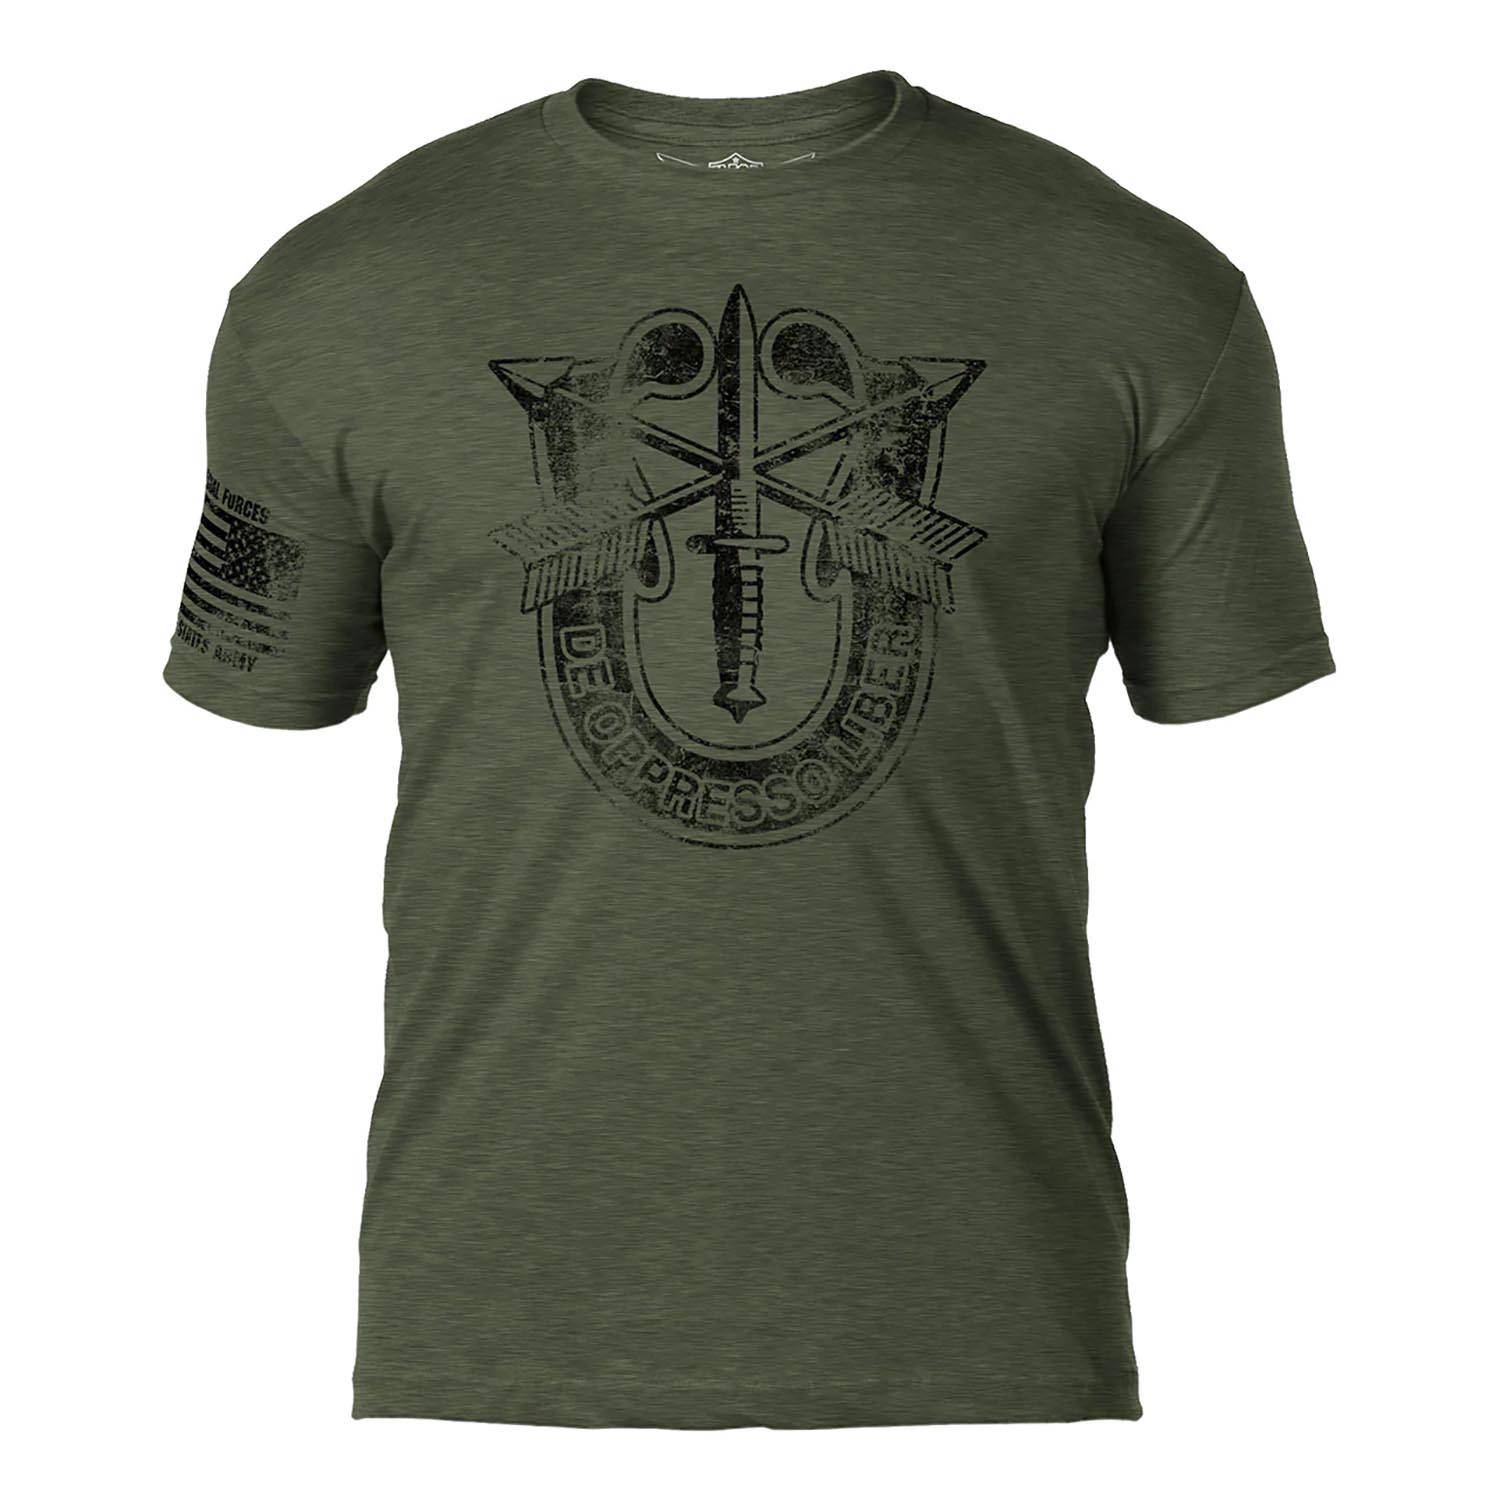 7.62 Design Army Special Forces T-Shirt